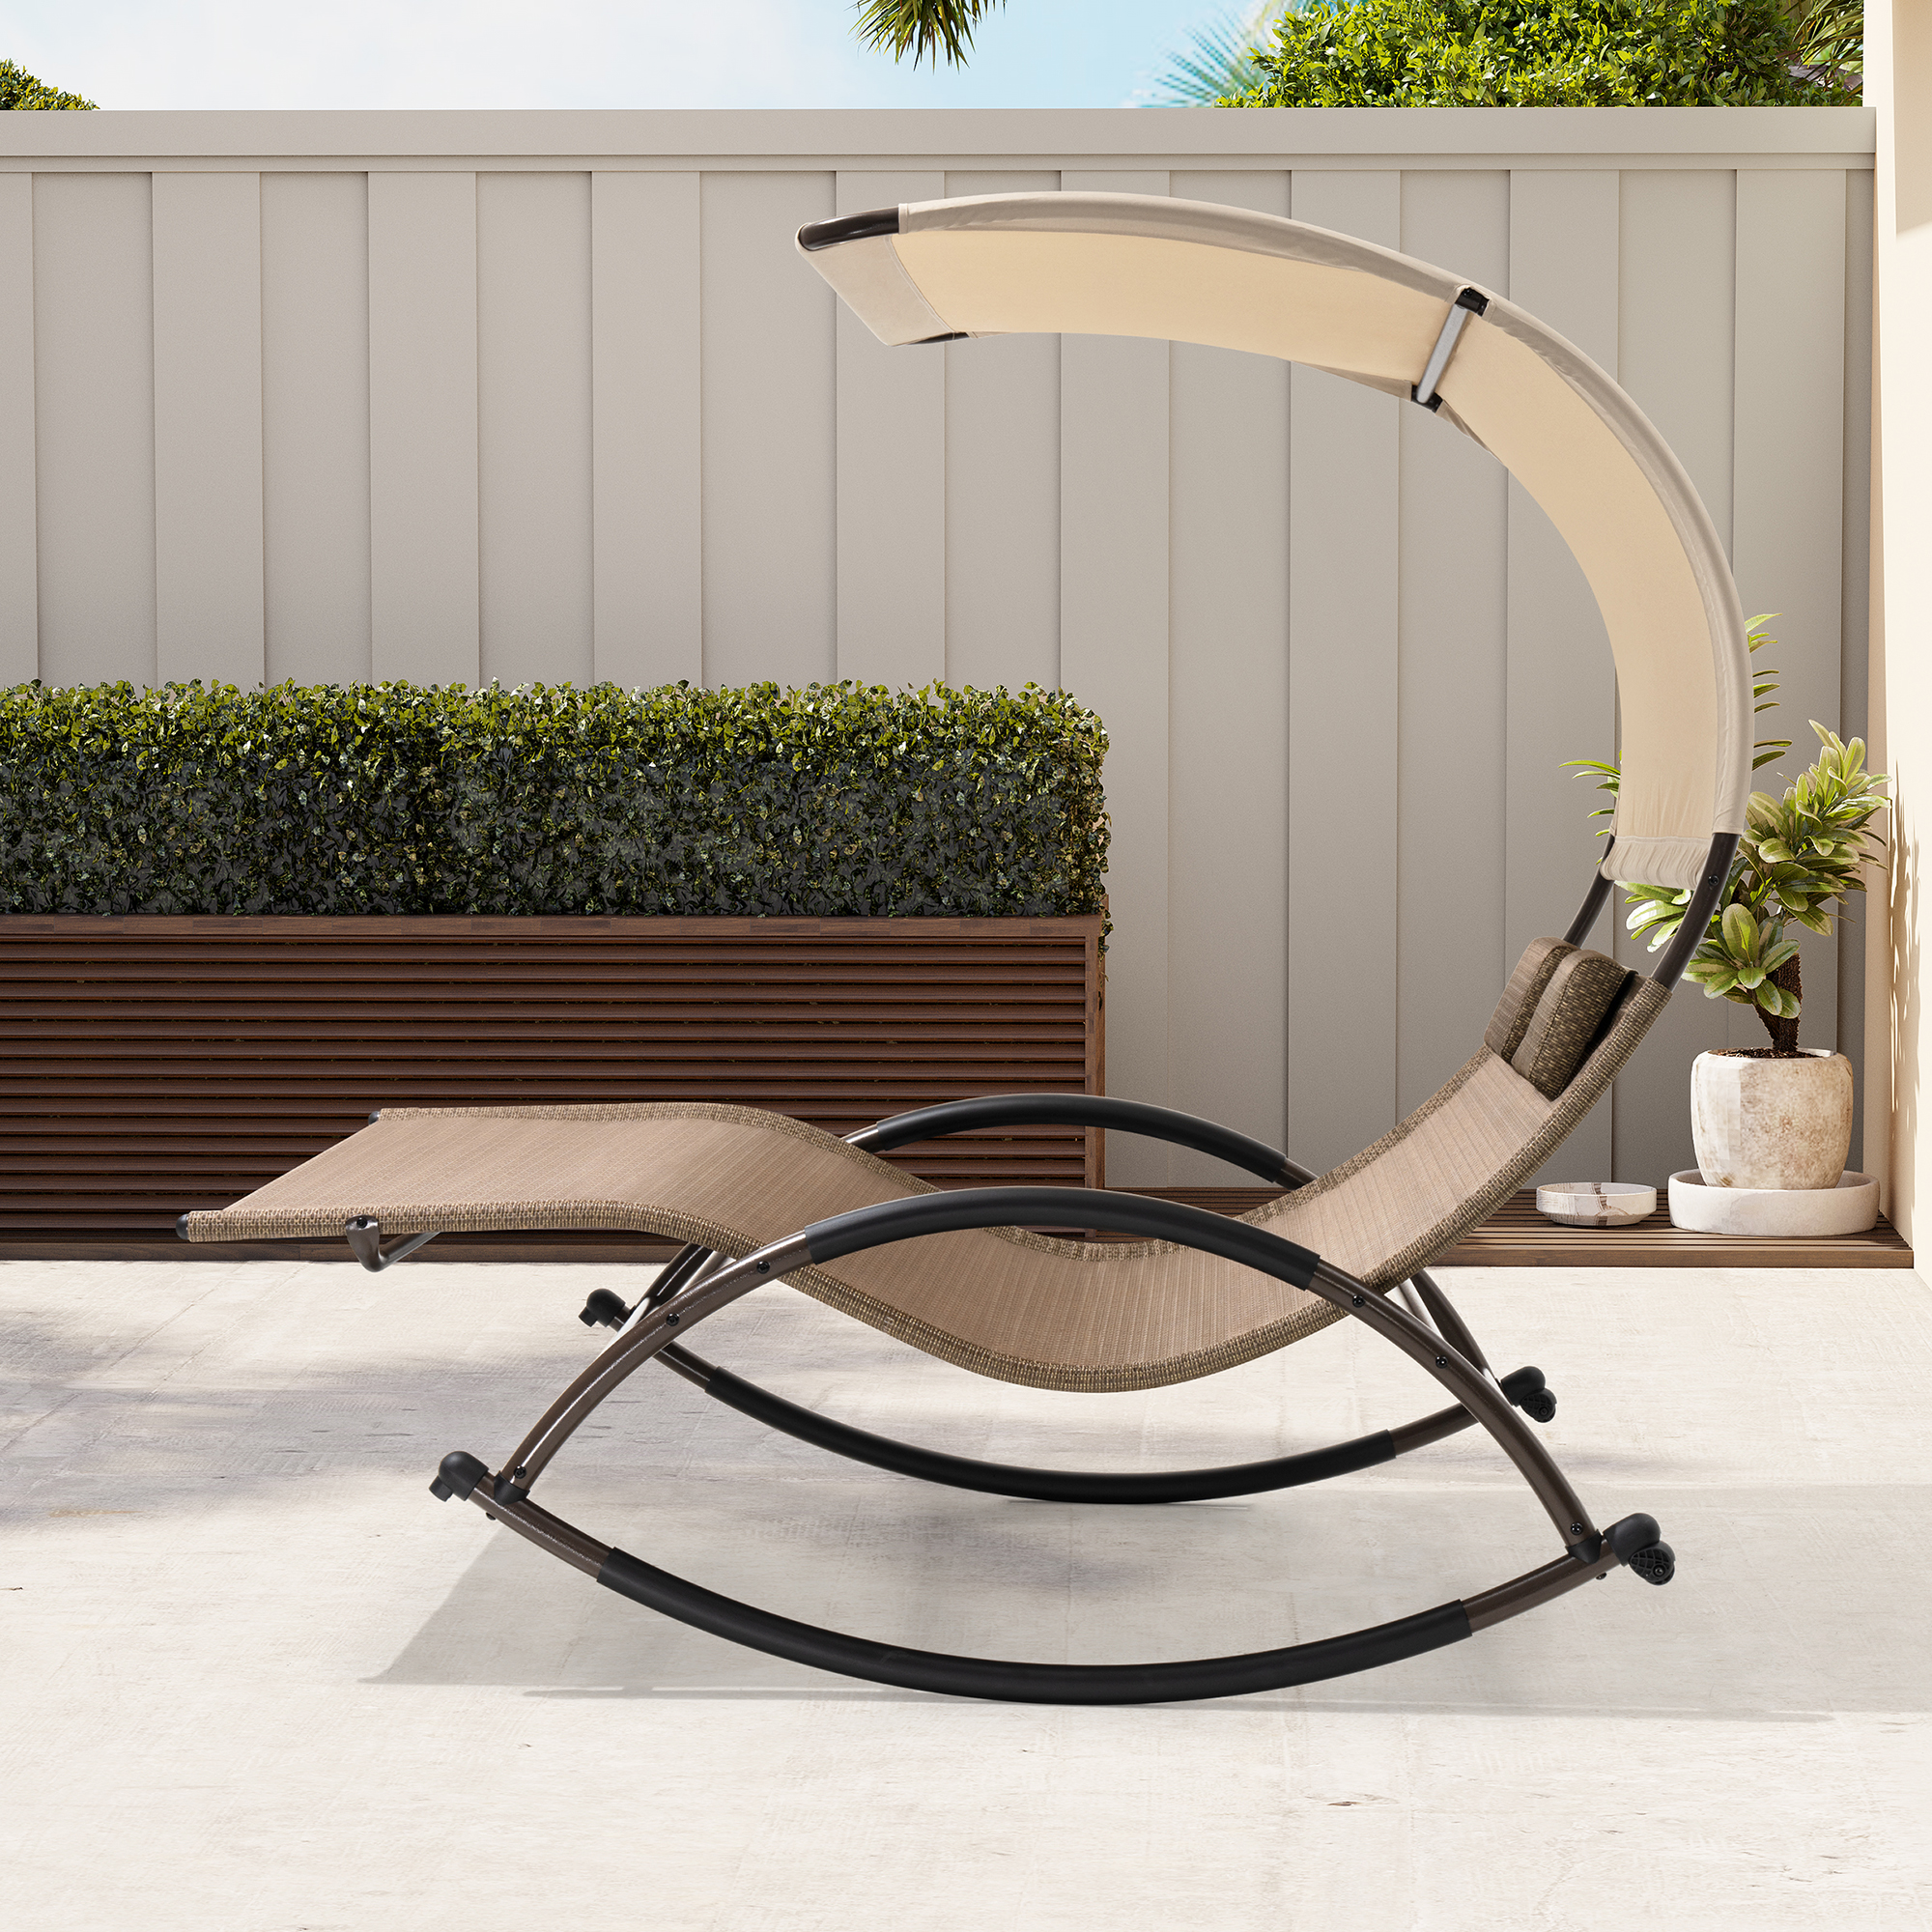 Pellebant Outdoor Double Chaise Lounge with Shade Patio Metal Rocking Chair in Brown - image 5 of 7